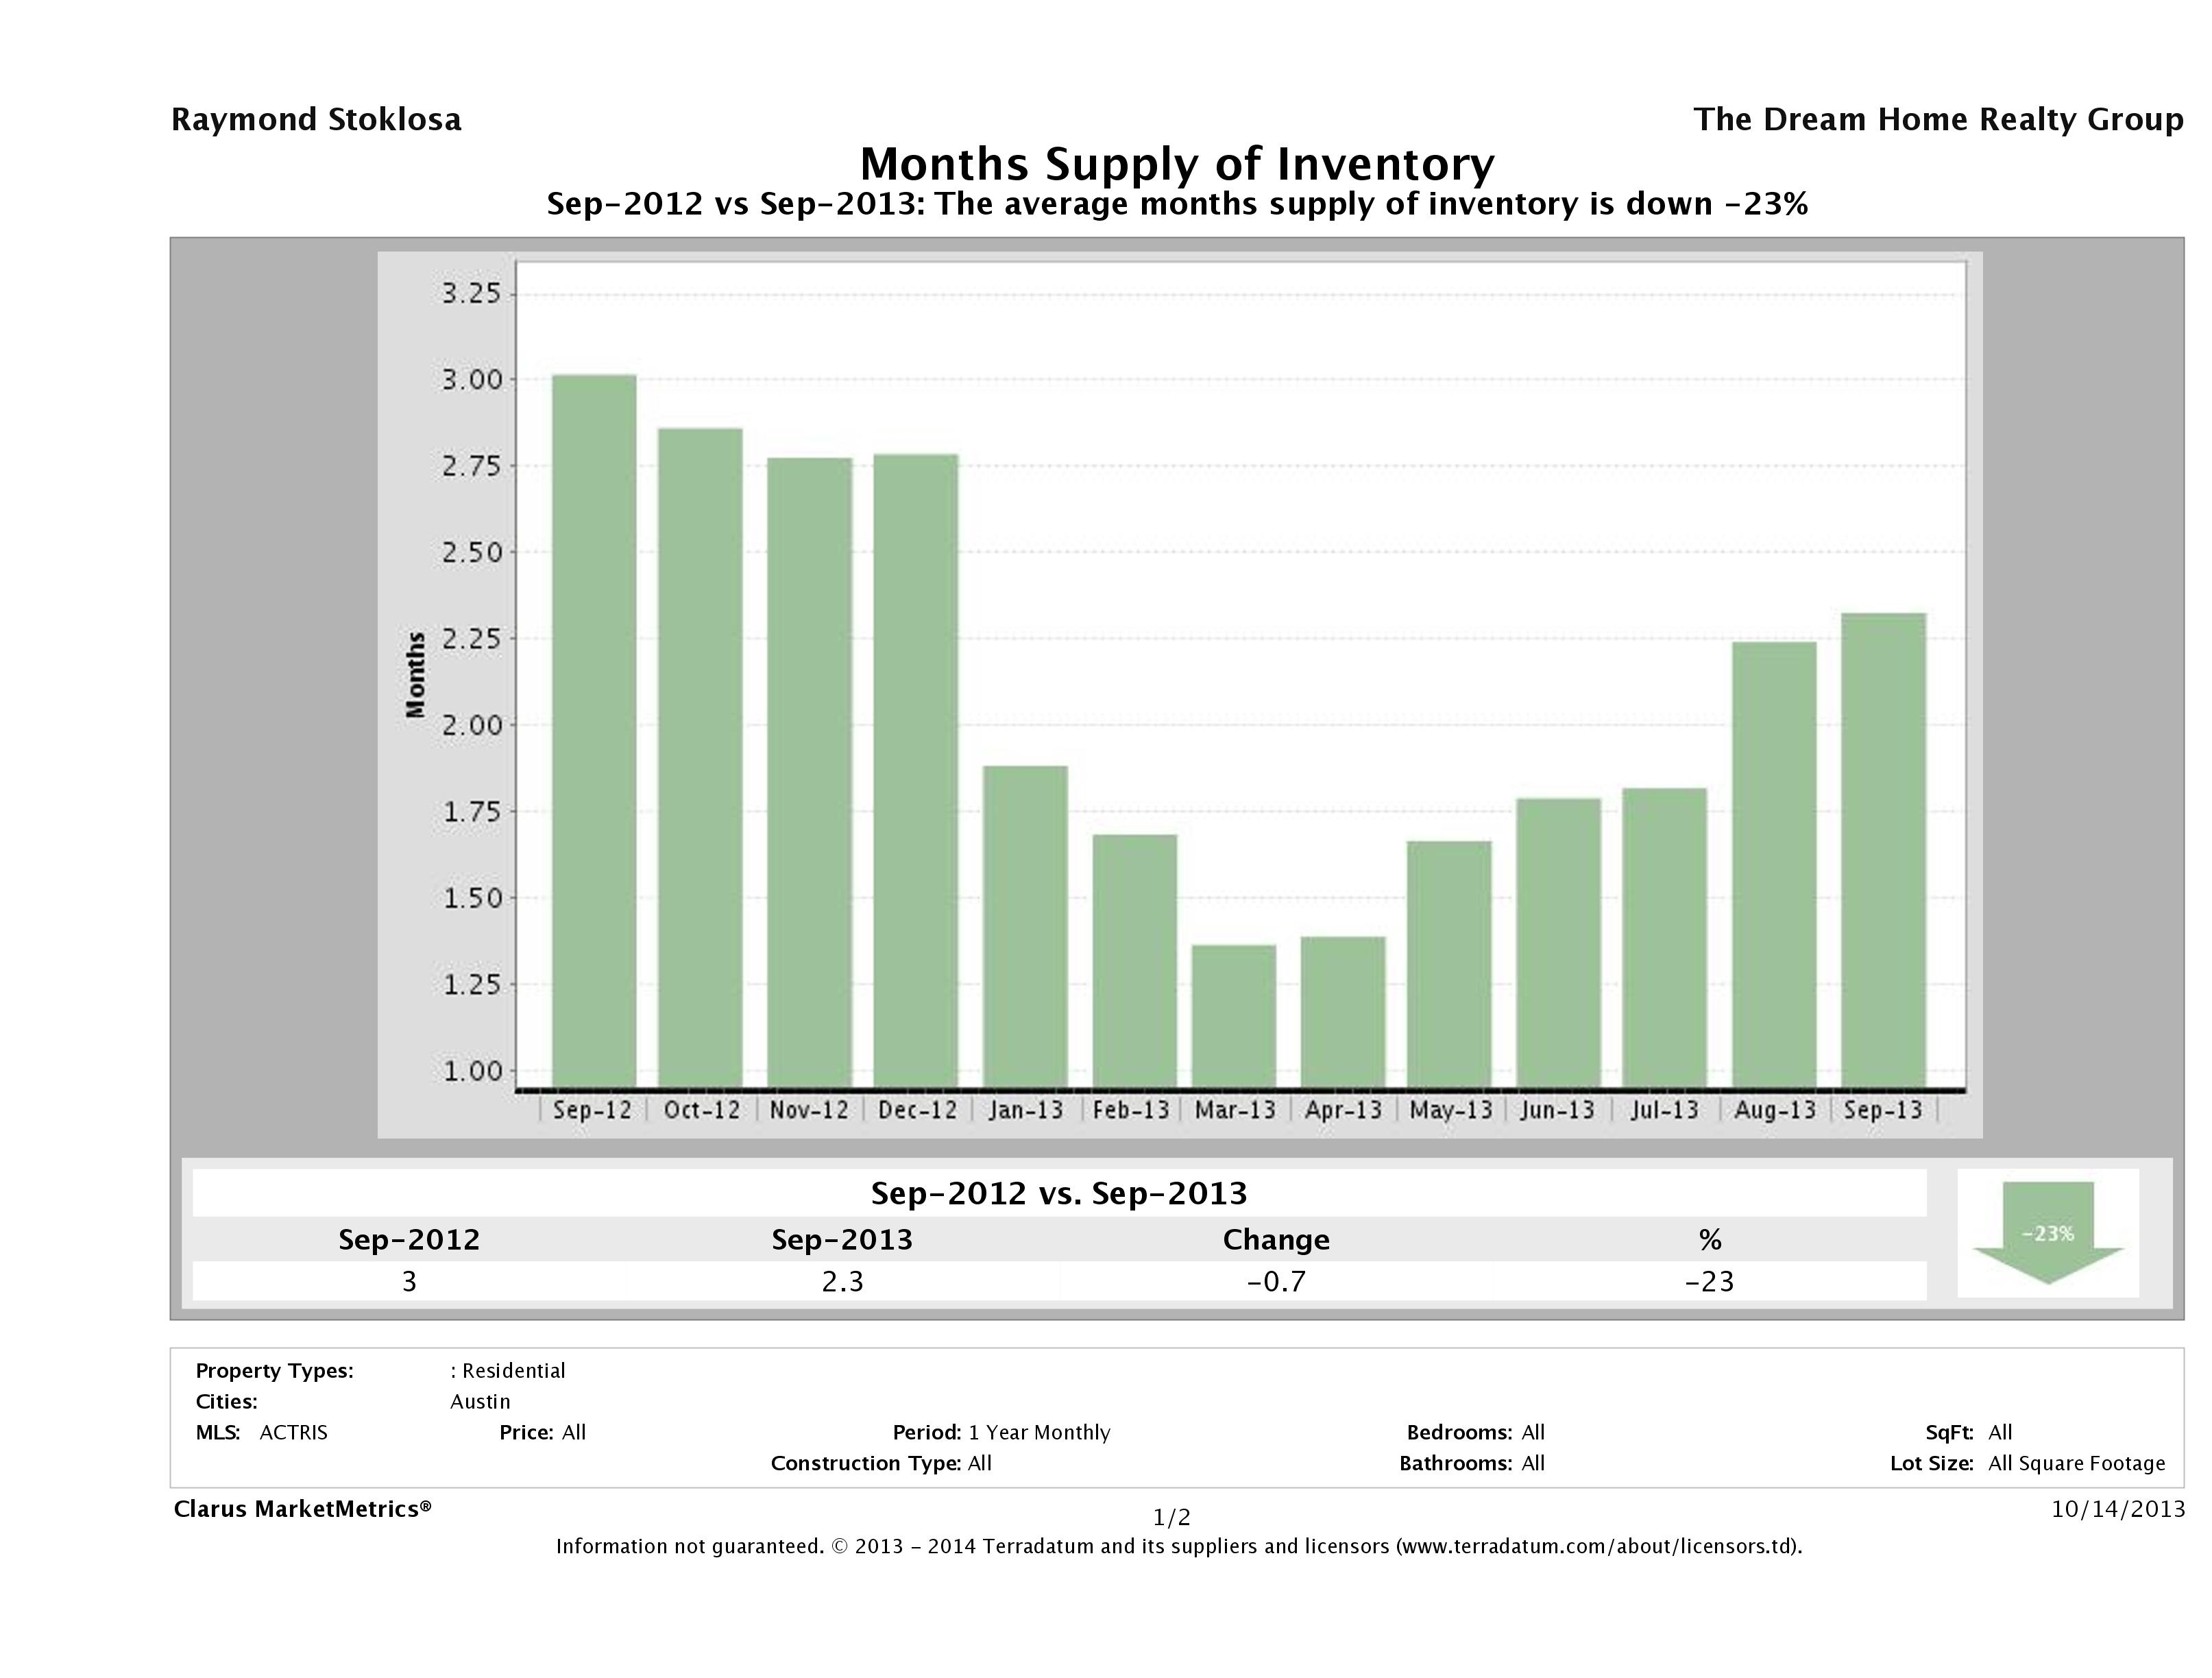 Austin single family home months inventory September 2013